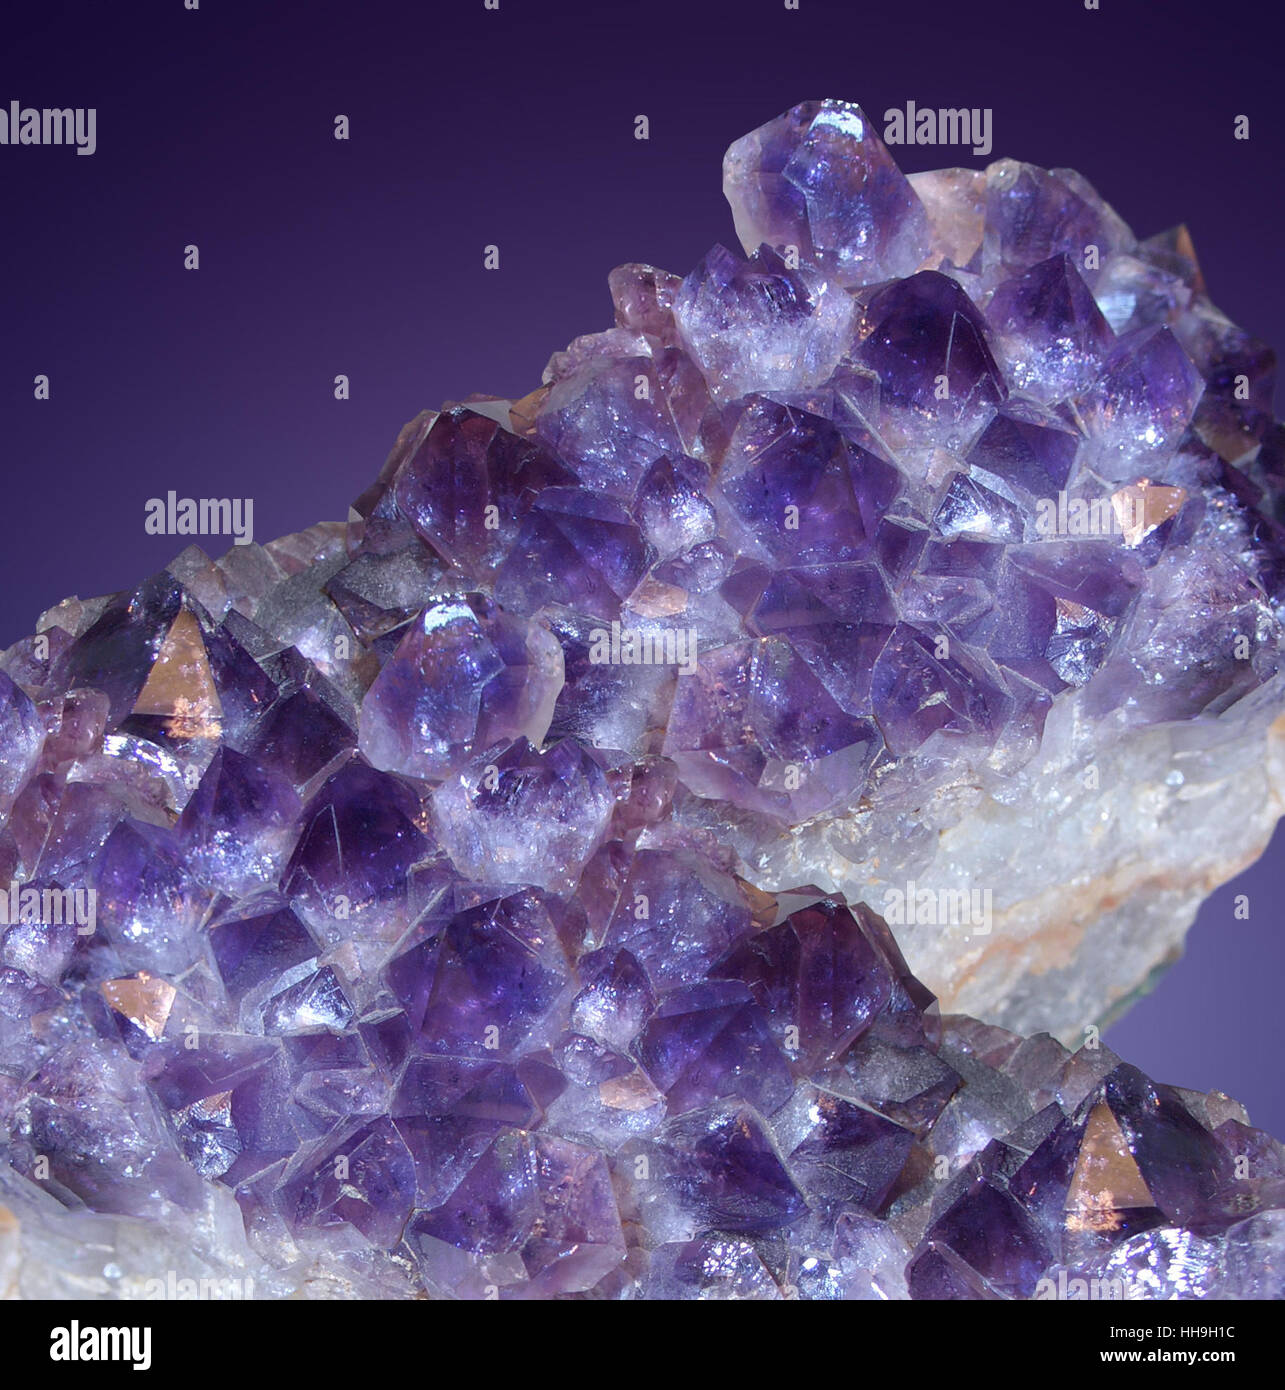 studio shot with amethyst crystals in violet back Stock Photo